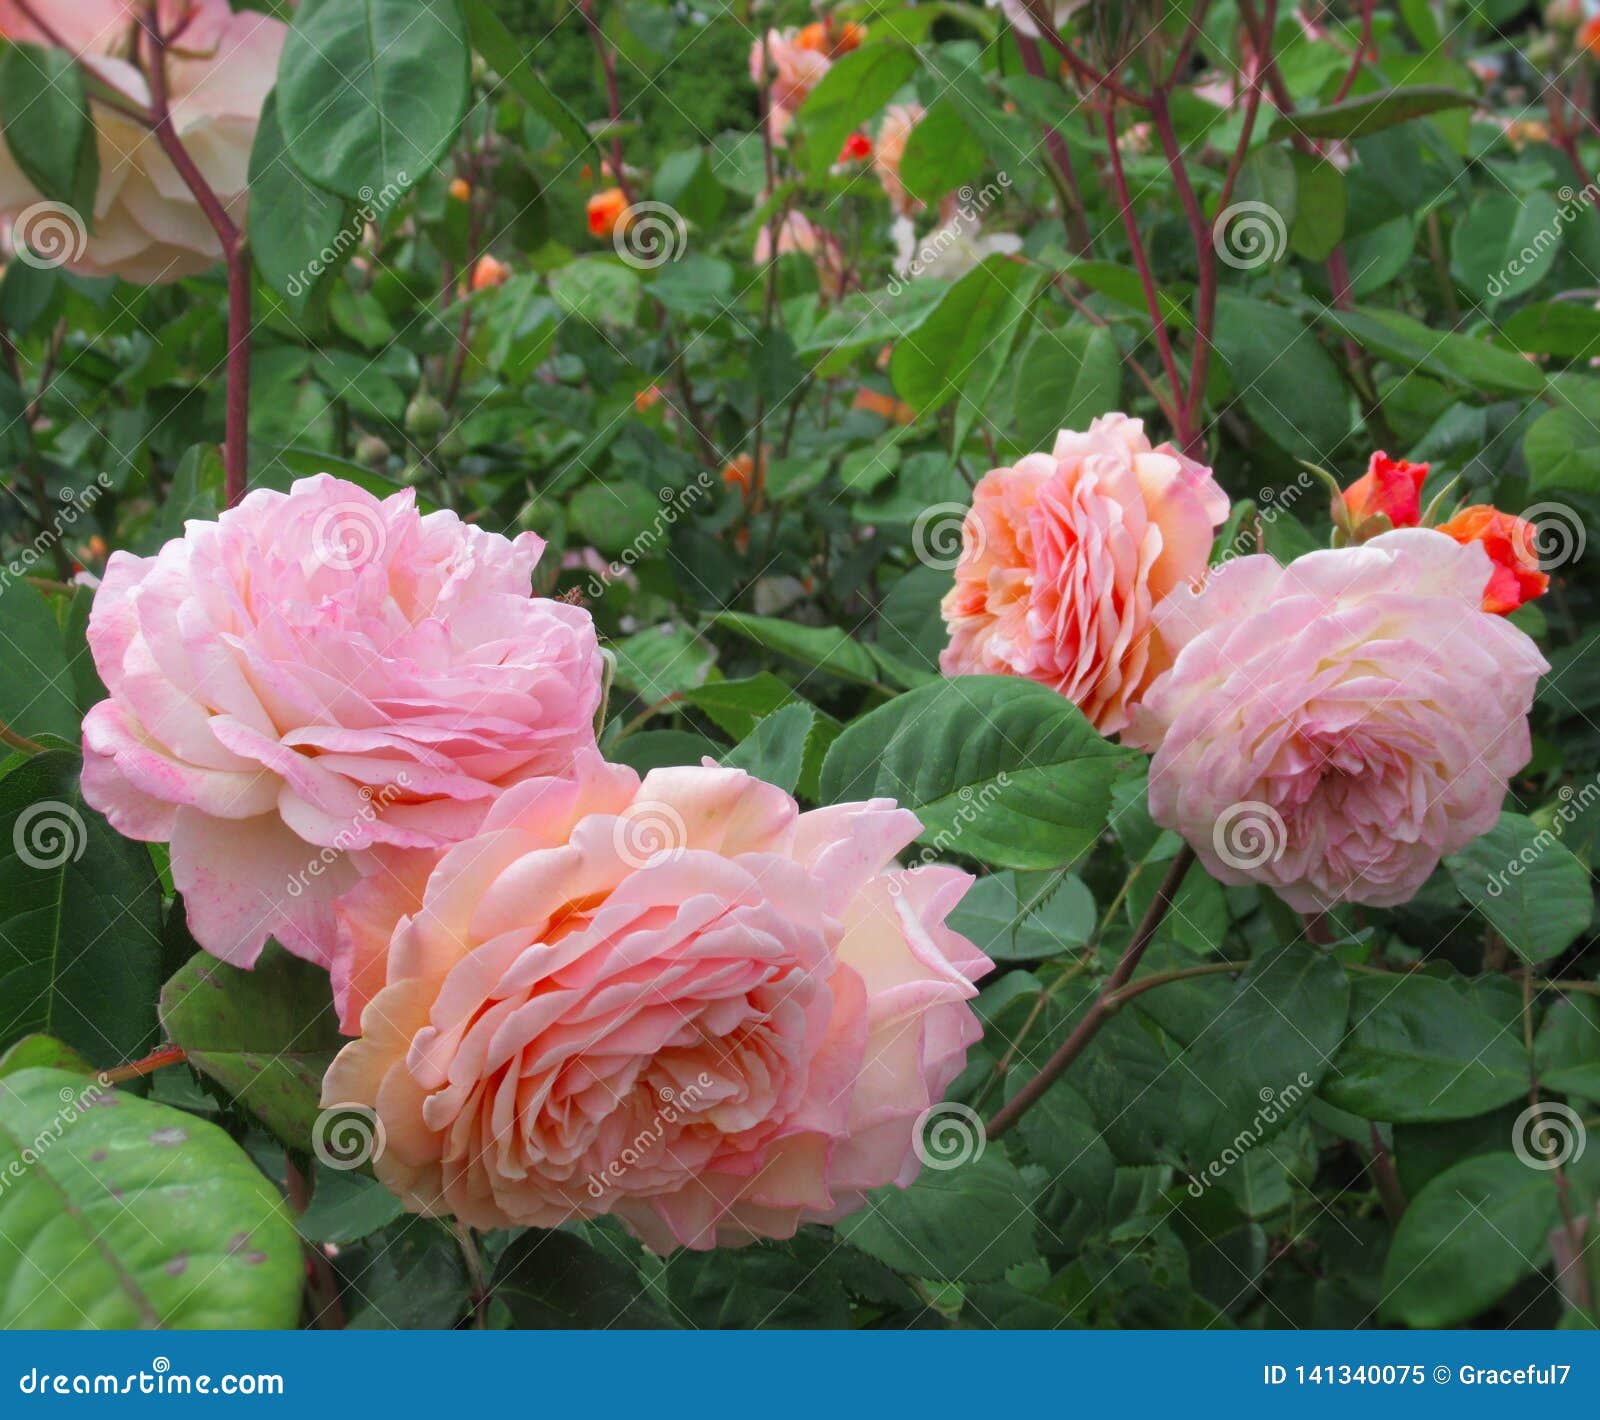 Pretty Attractive Light Pink Rose Flowers Blossom in Park Garden Stock ...